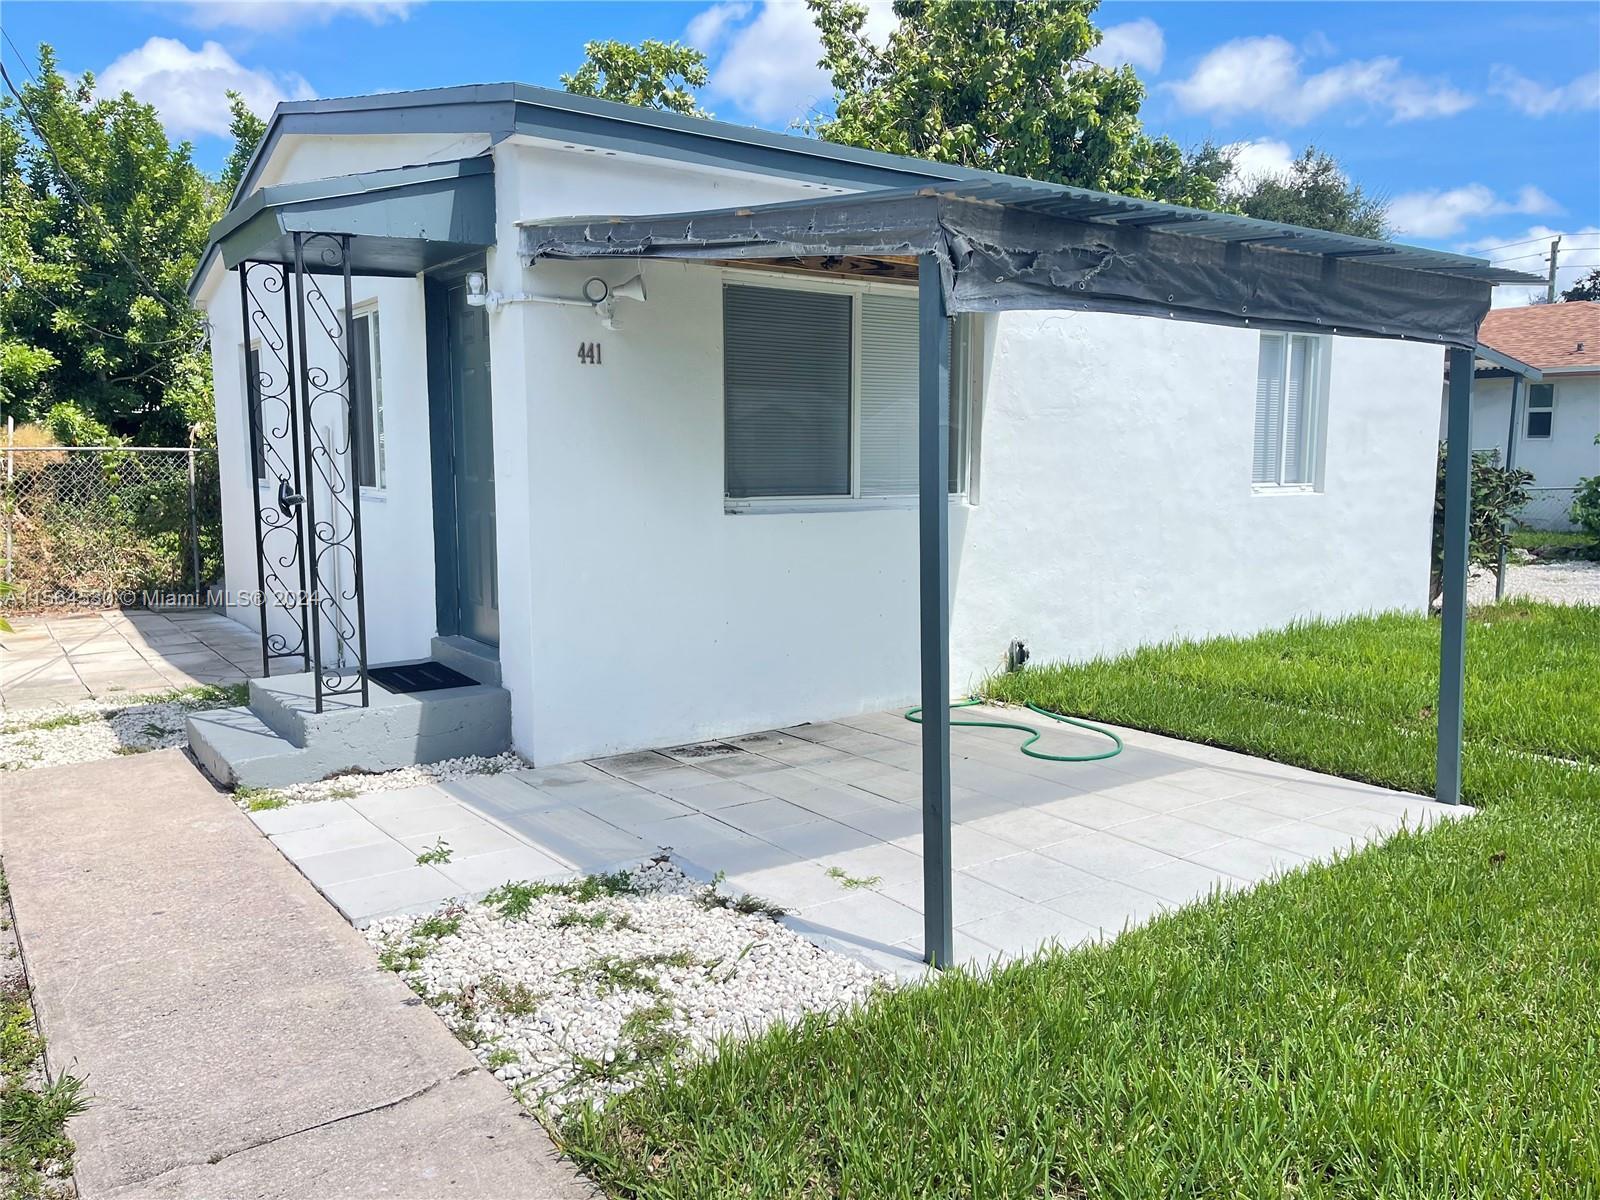 Photo of 441 NW 95th St #1 in Miami, FL